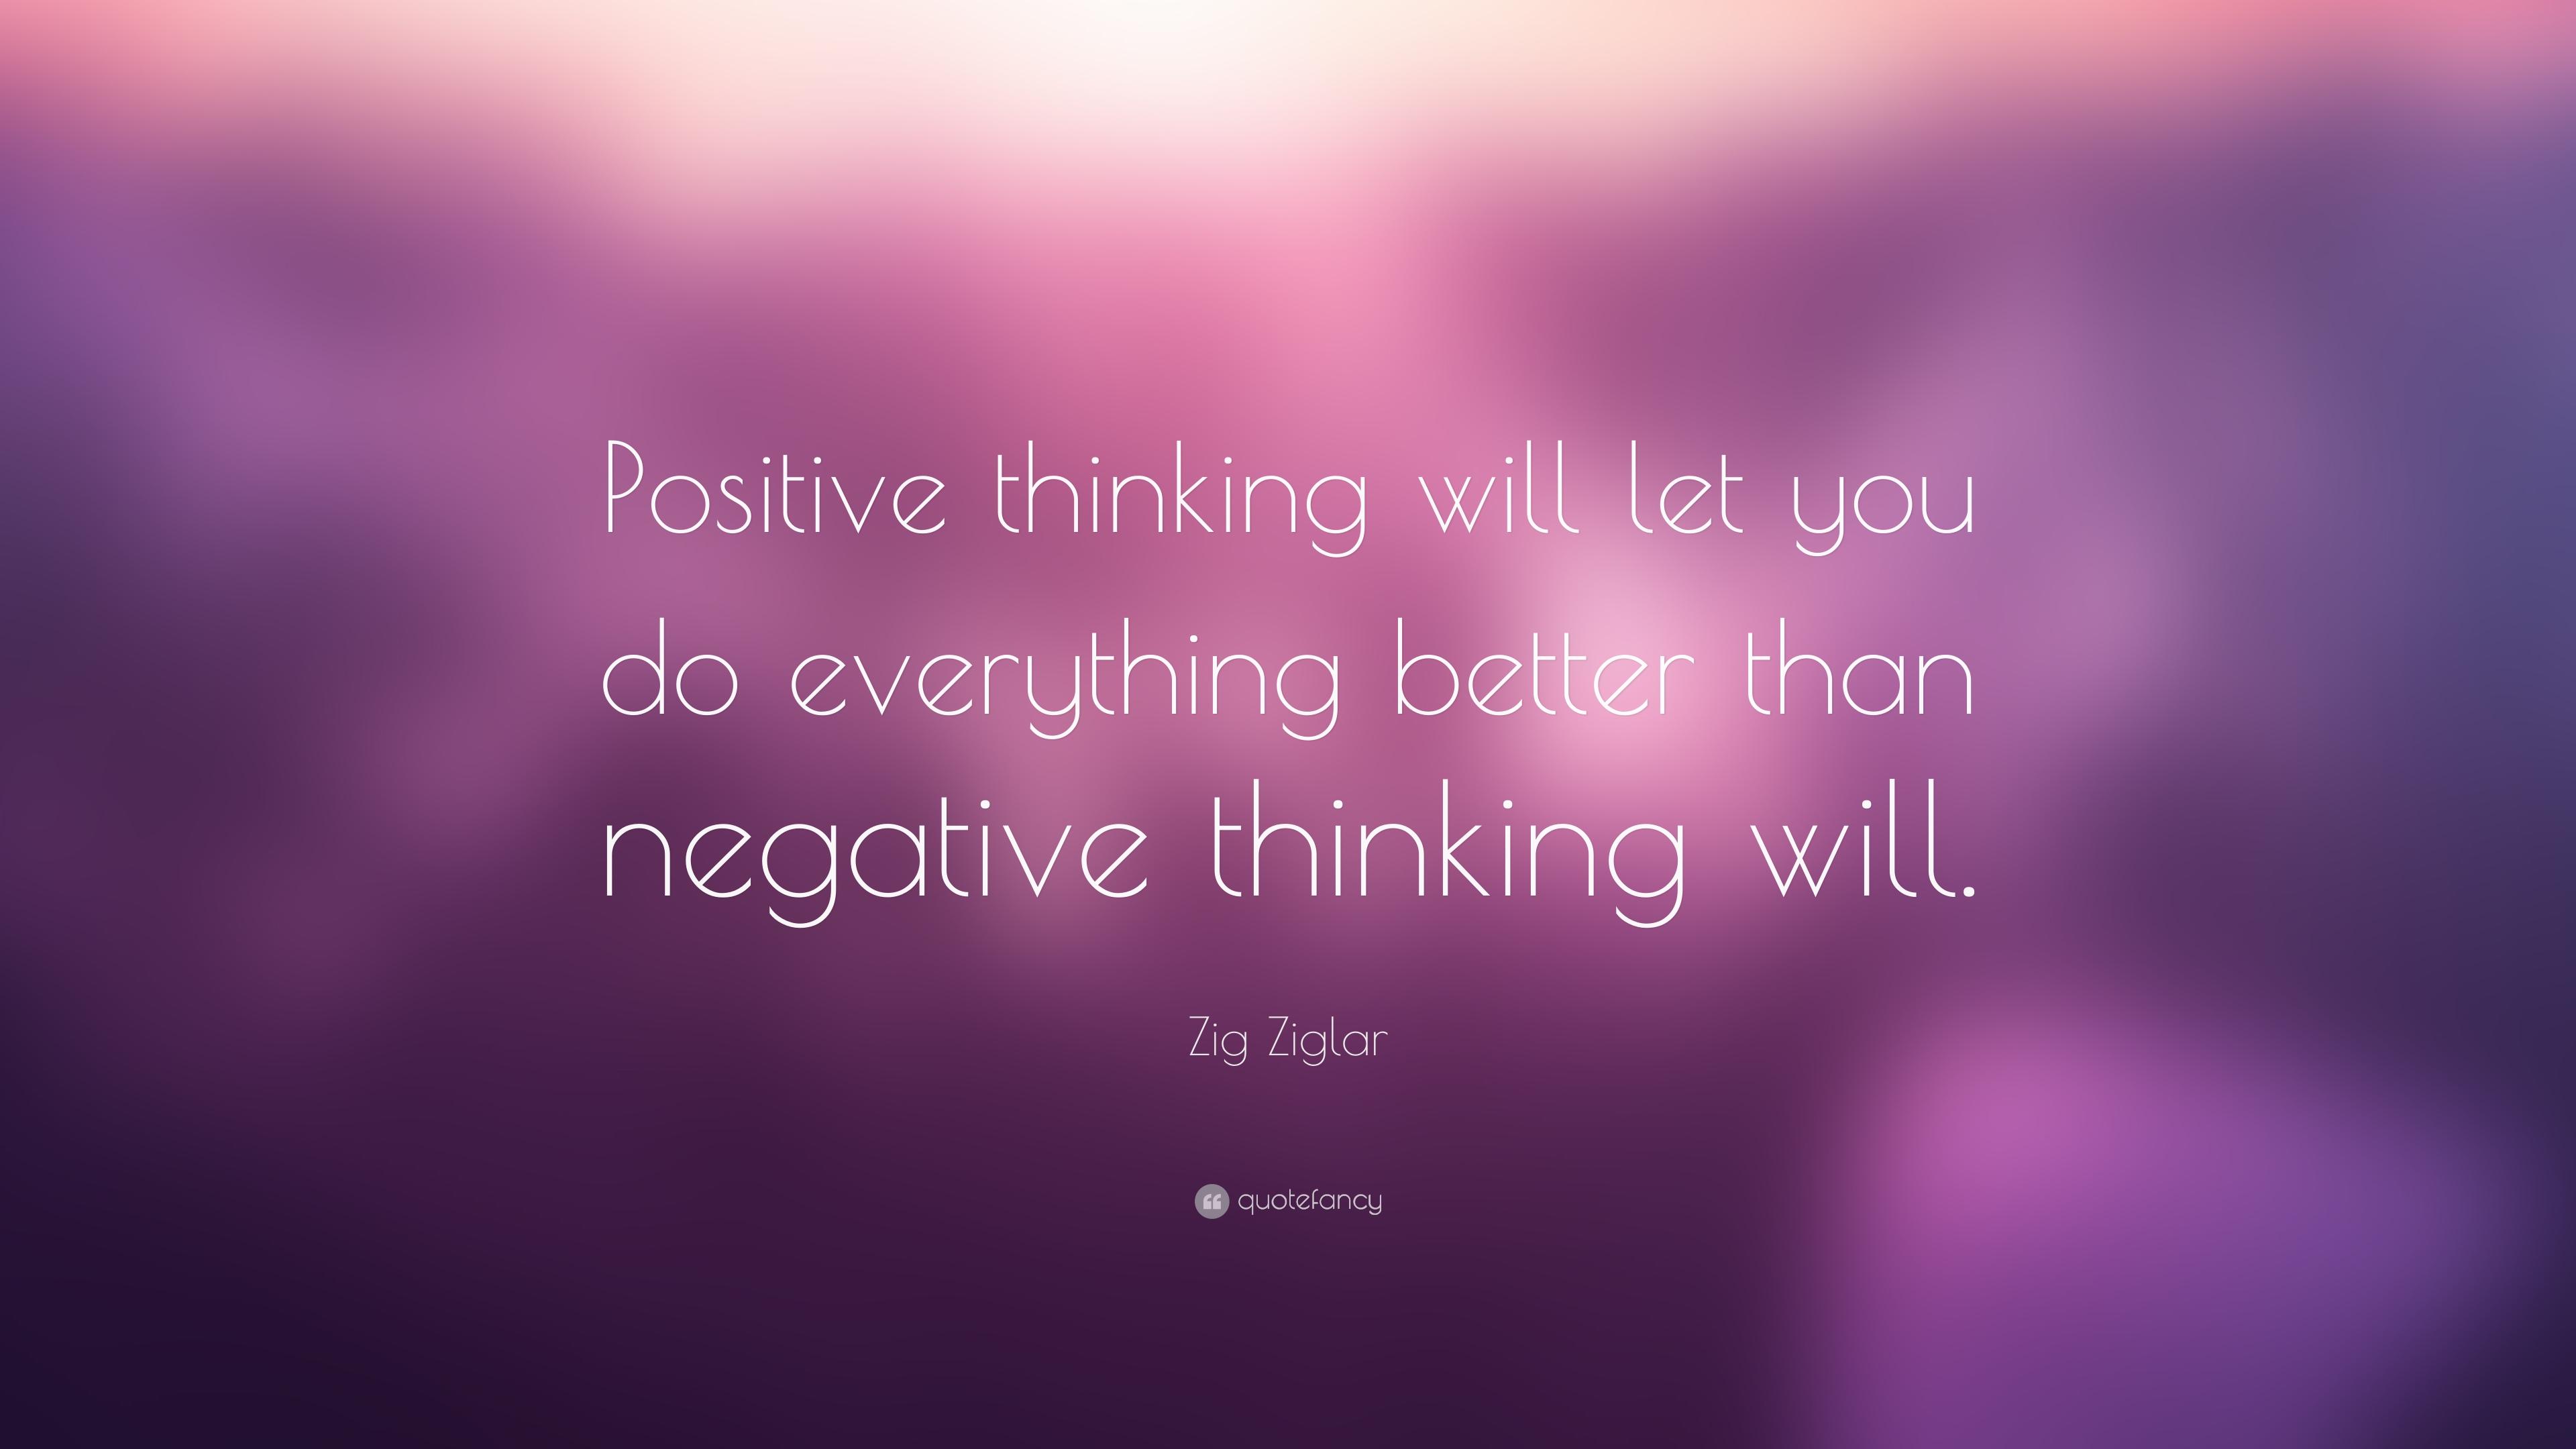 Zig Ziglar Quote: “Positive thinking will let you do everything better than negative thinking will.”